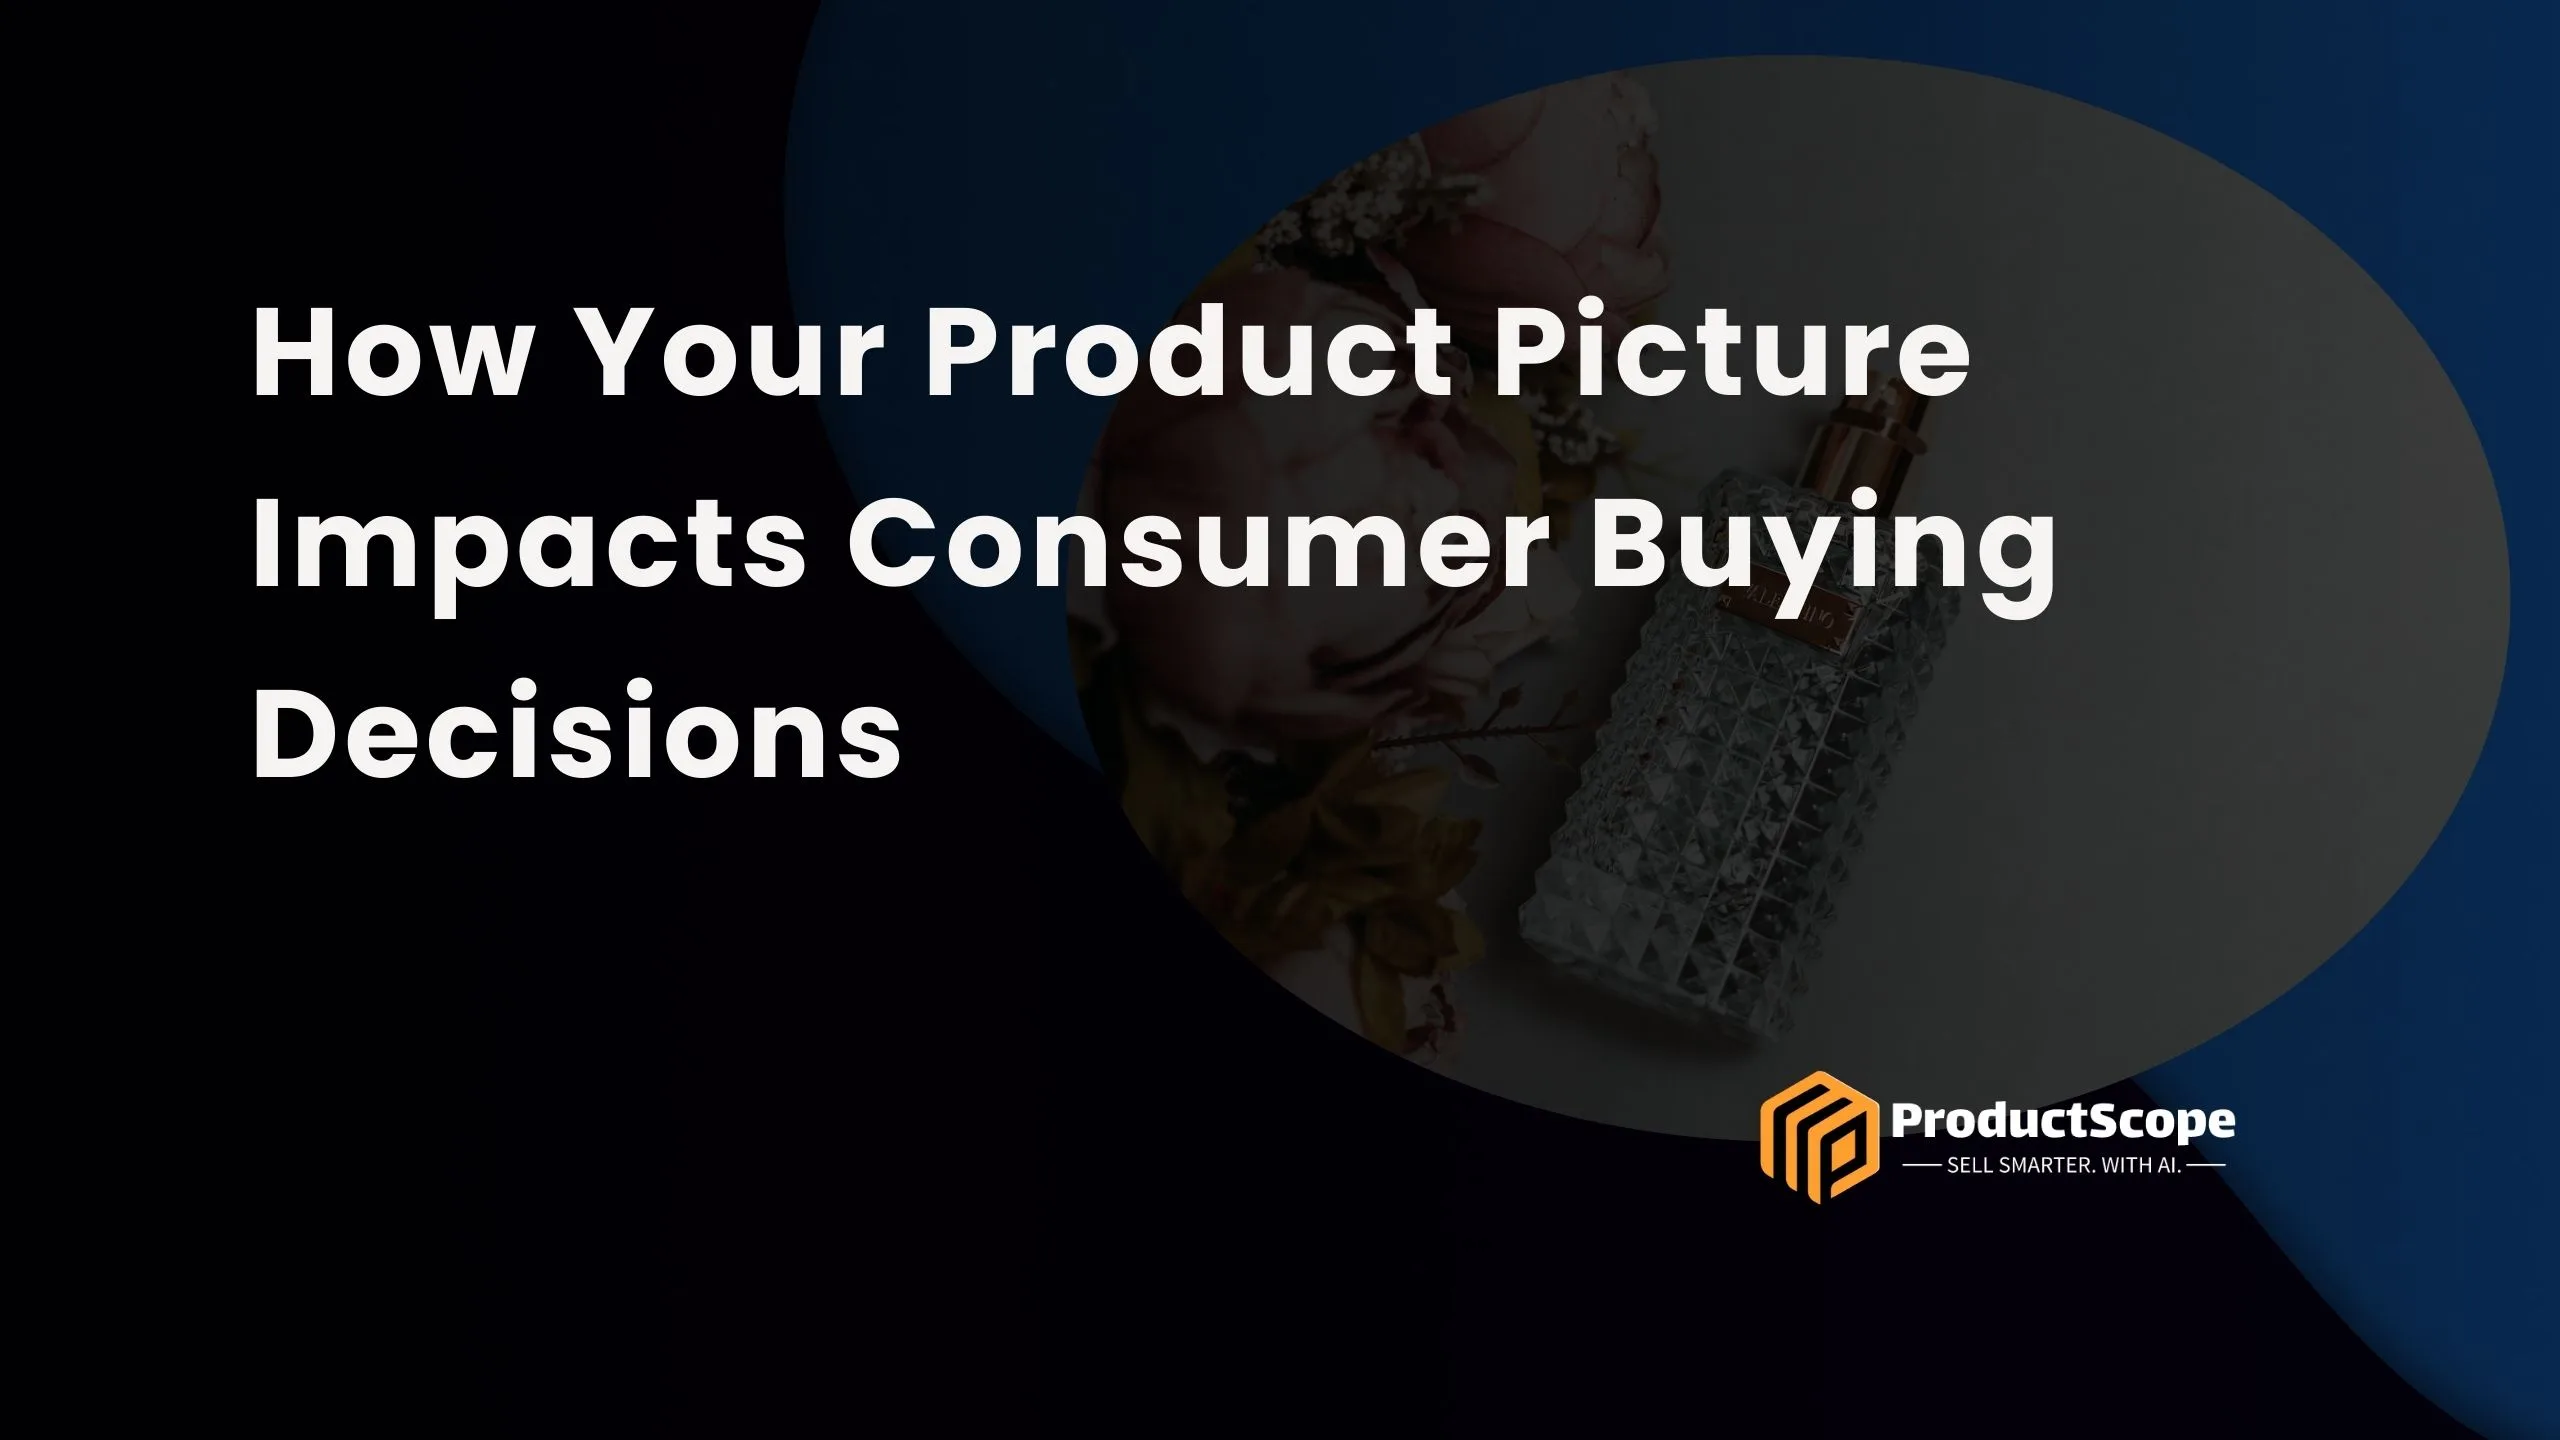 How Your Product Picture Impacts Consumer Buying Decisions